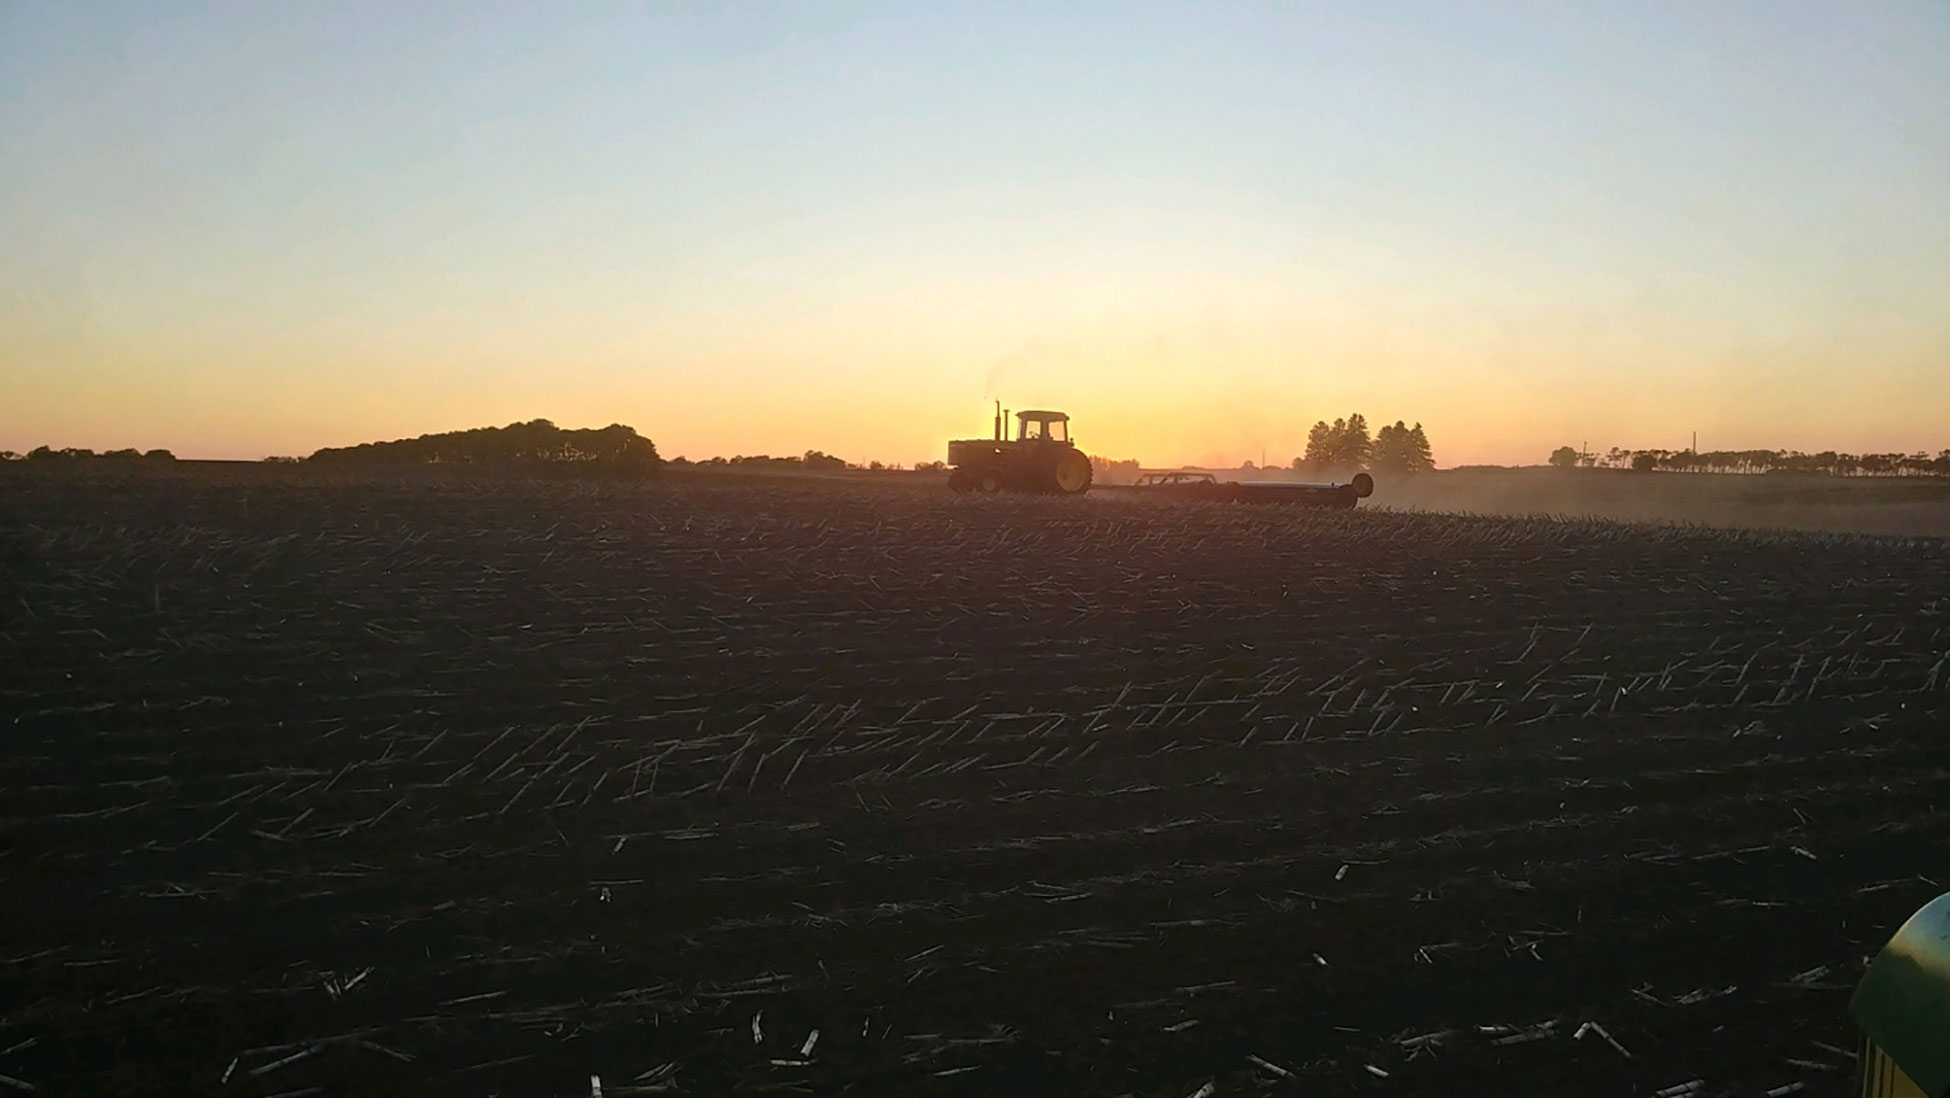 Tractor preparing a soybean field for planting at twilight.